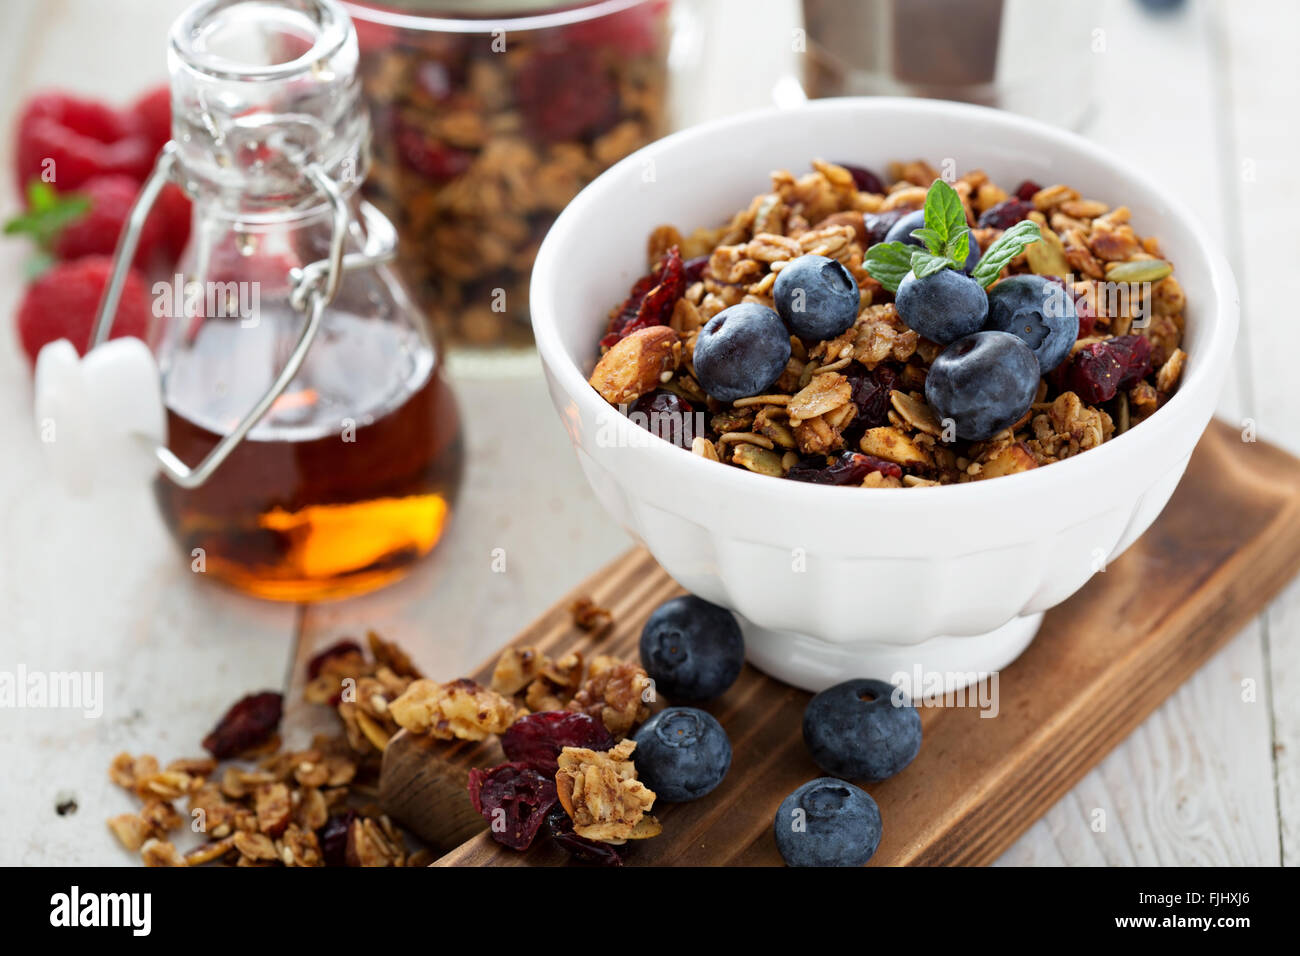 Homemade granola with berries for breakfast Stock Photo